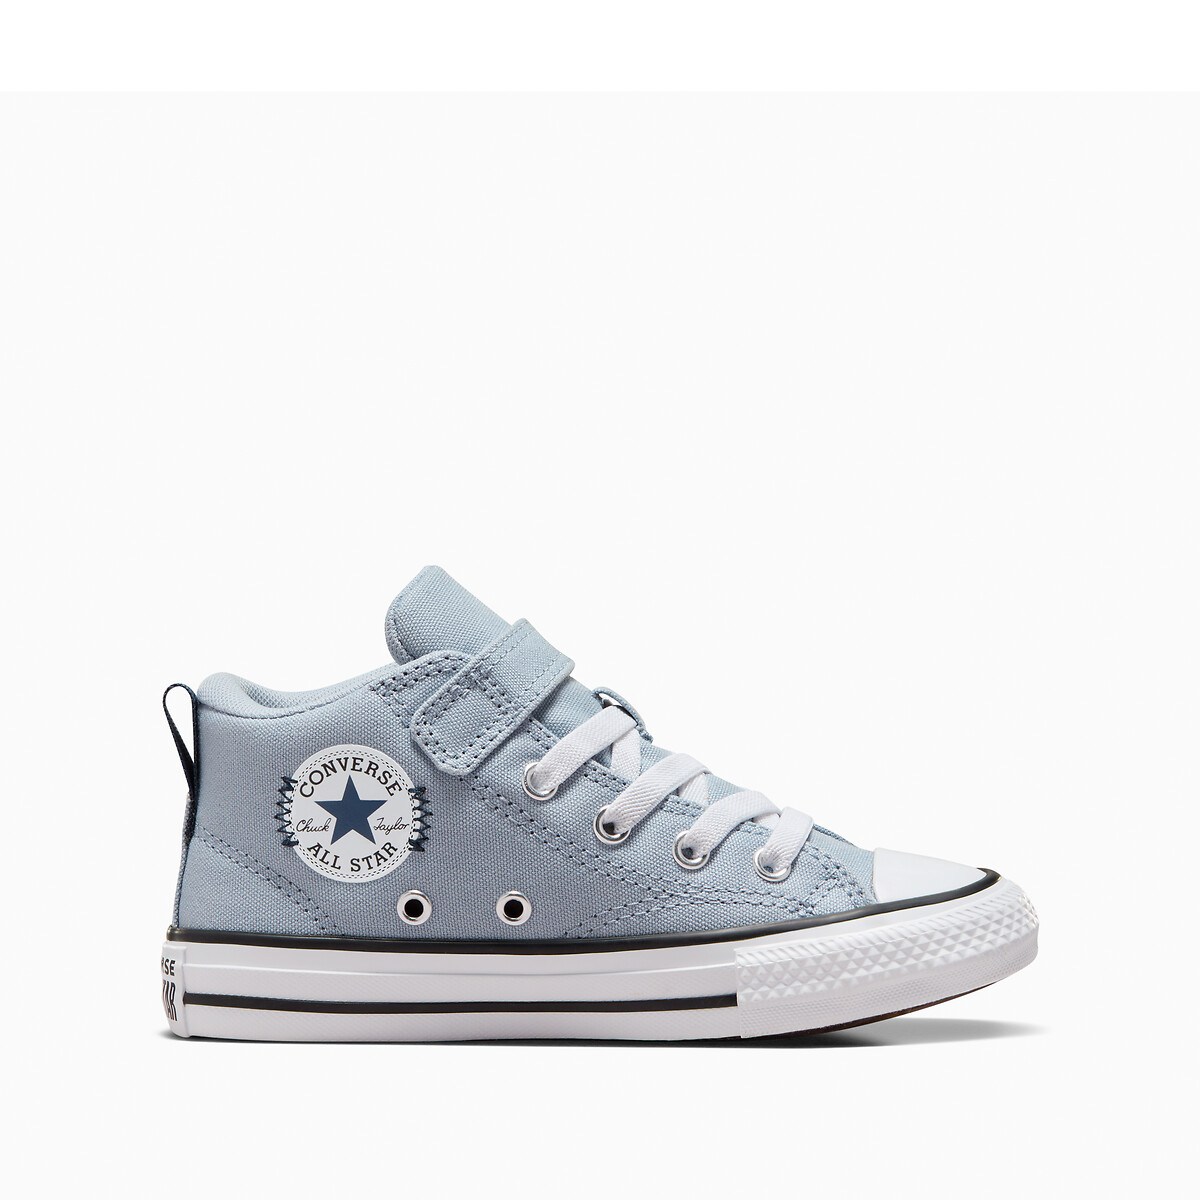 Converse Sneakers Malden Street Day 1V Mid Trip Utility